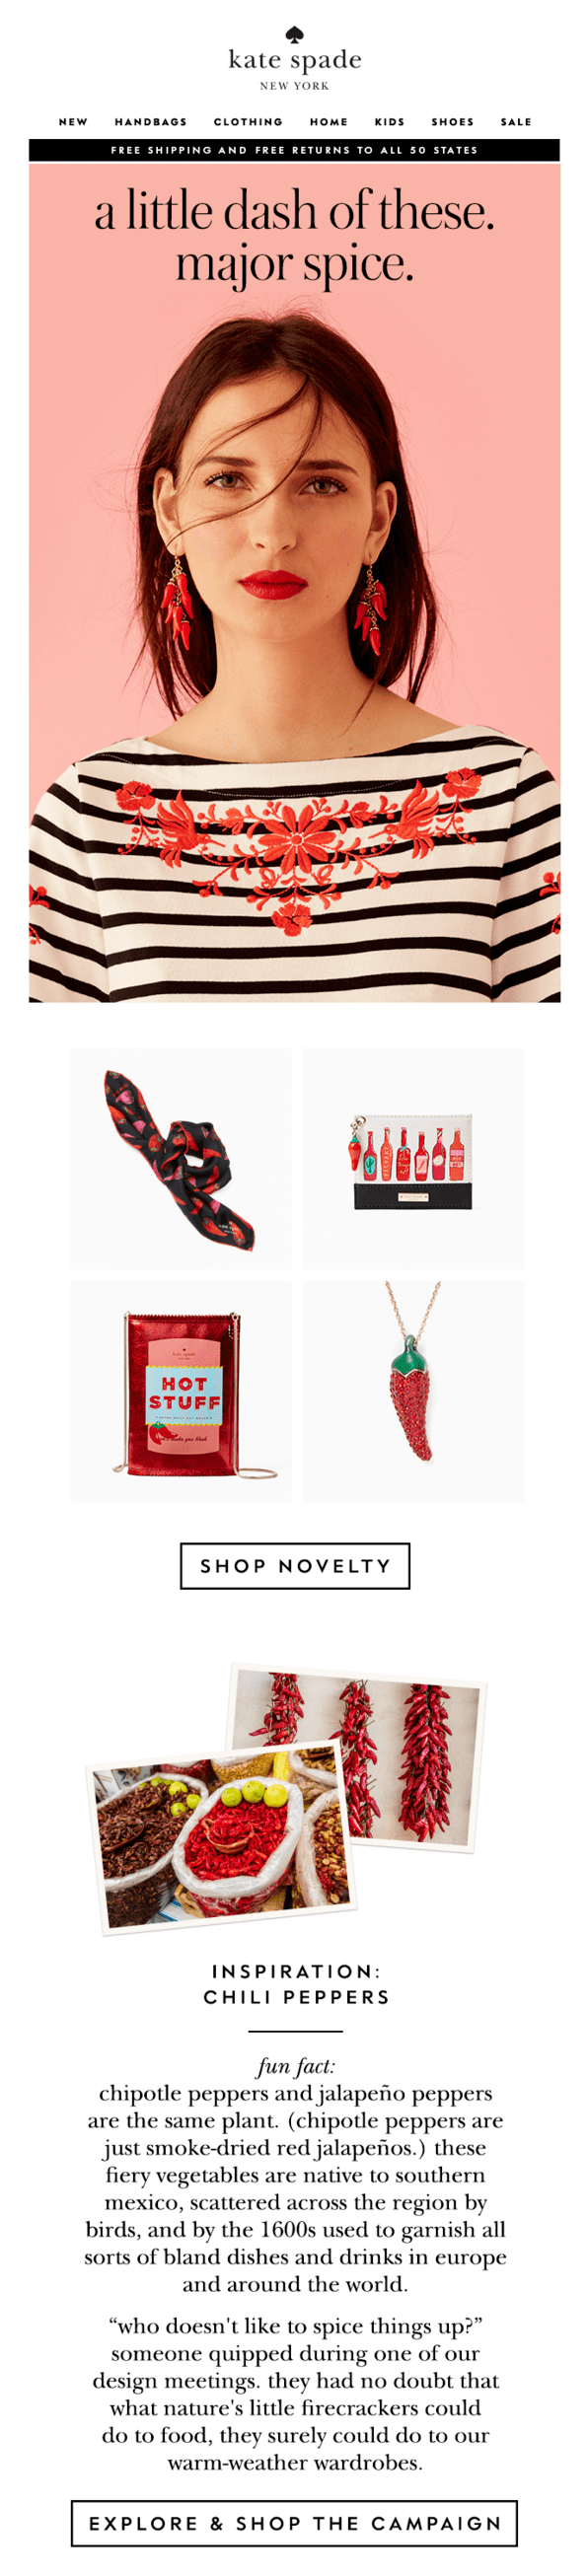 Example of a promotional email where storytelling is used to launch a new product range by Kate Spade